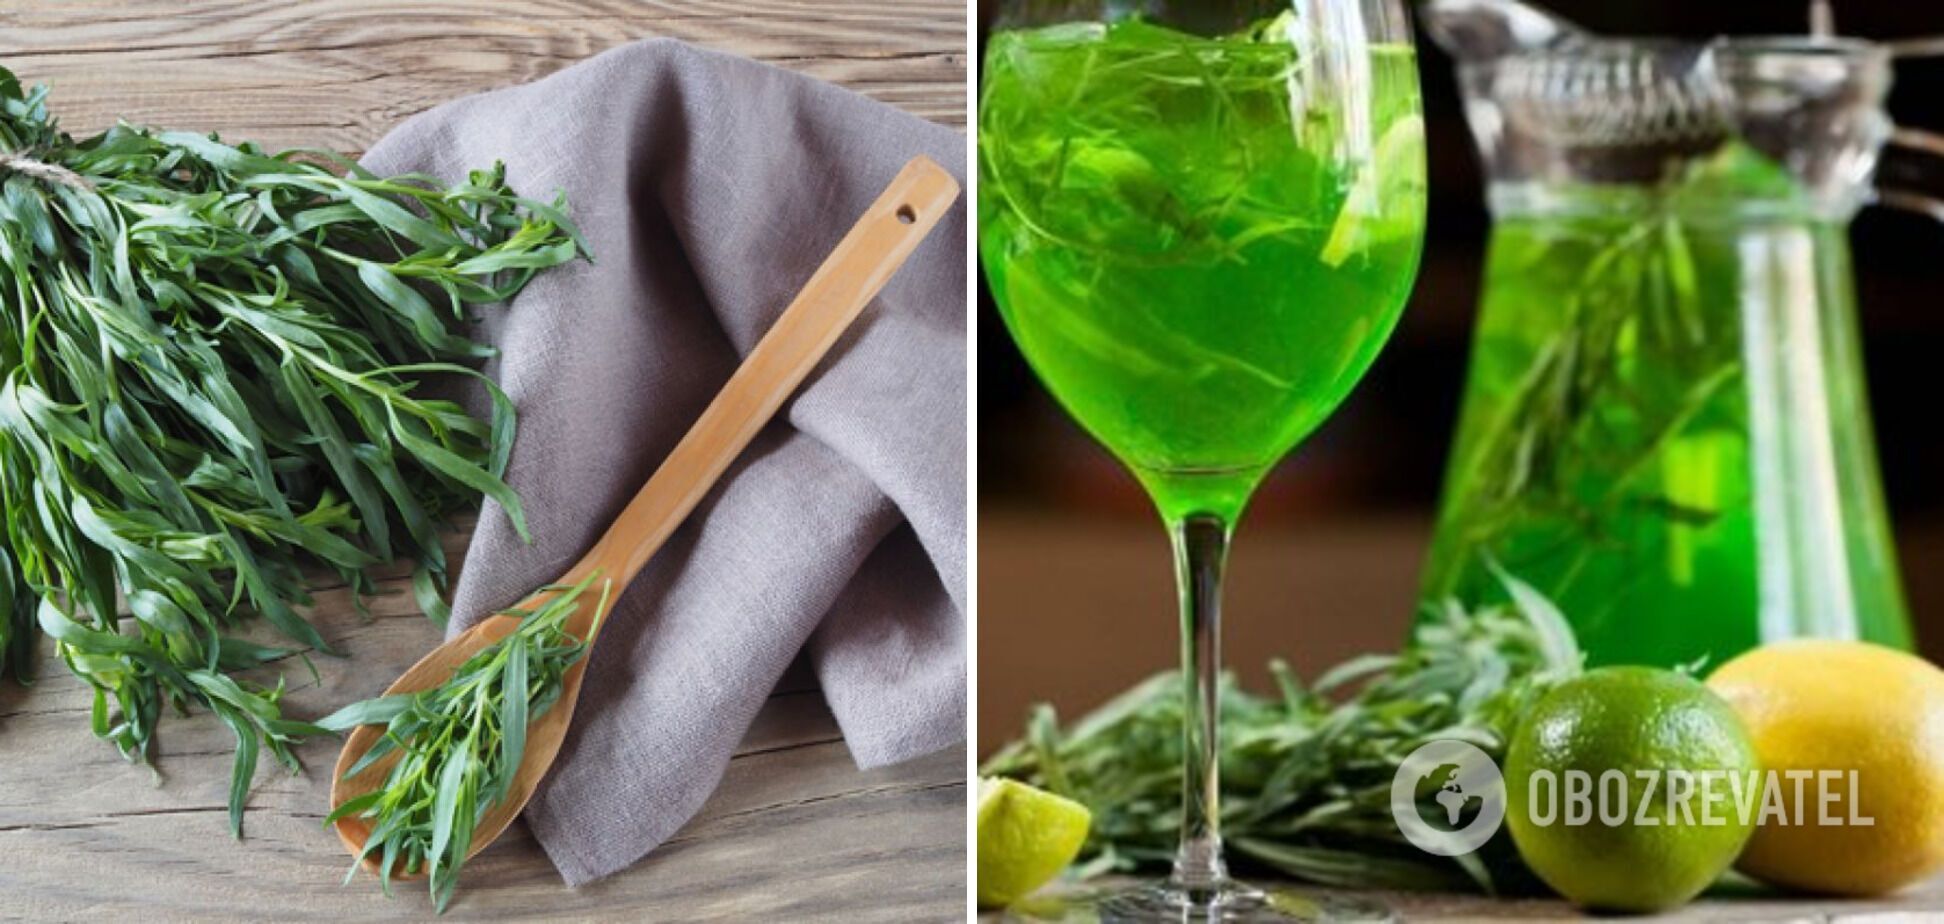 Drink with tarragon leaves